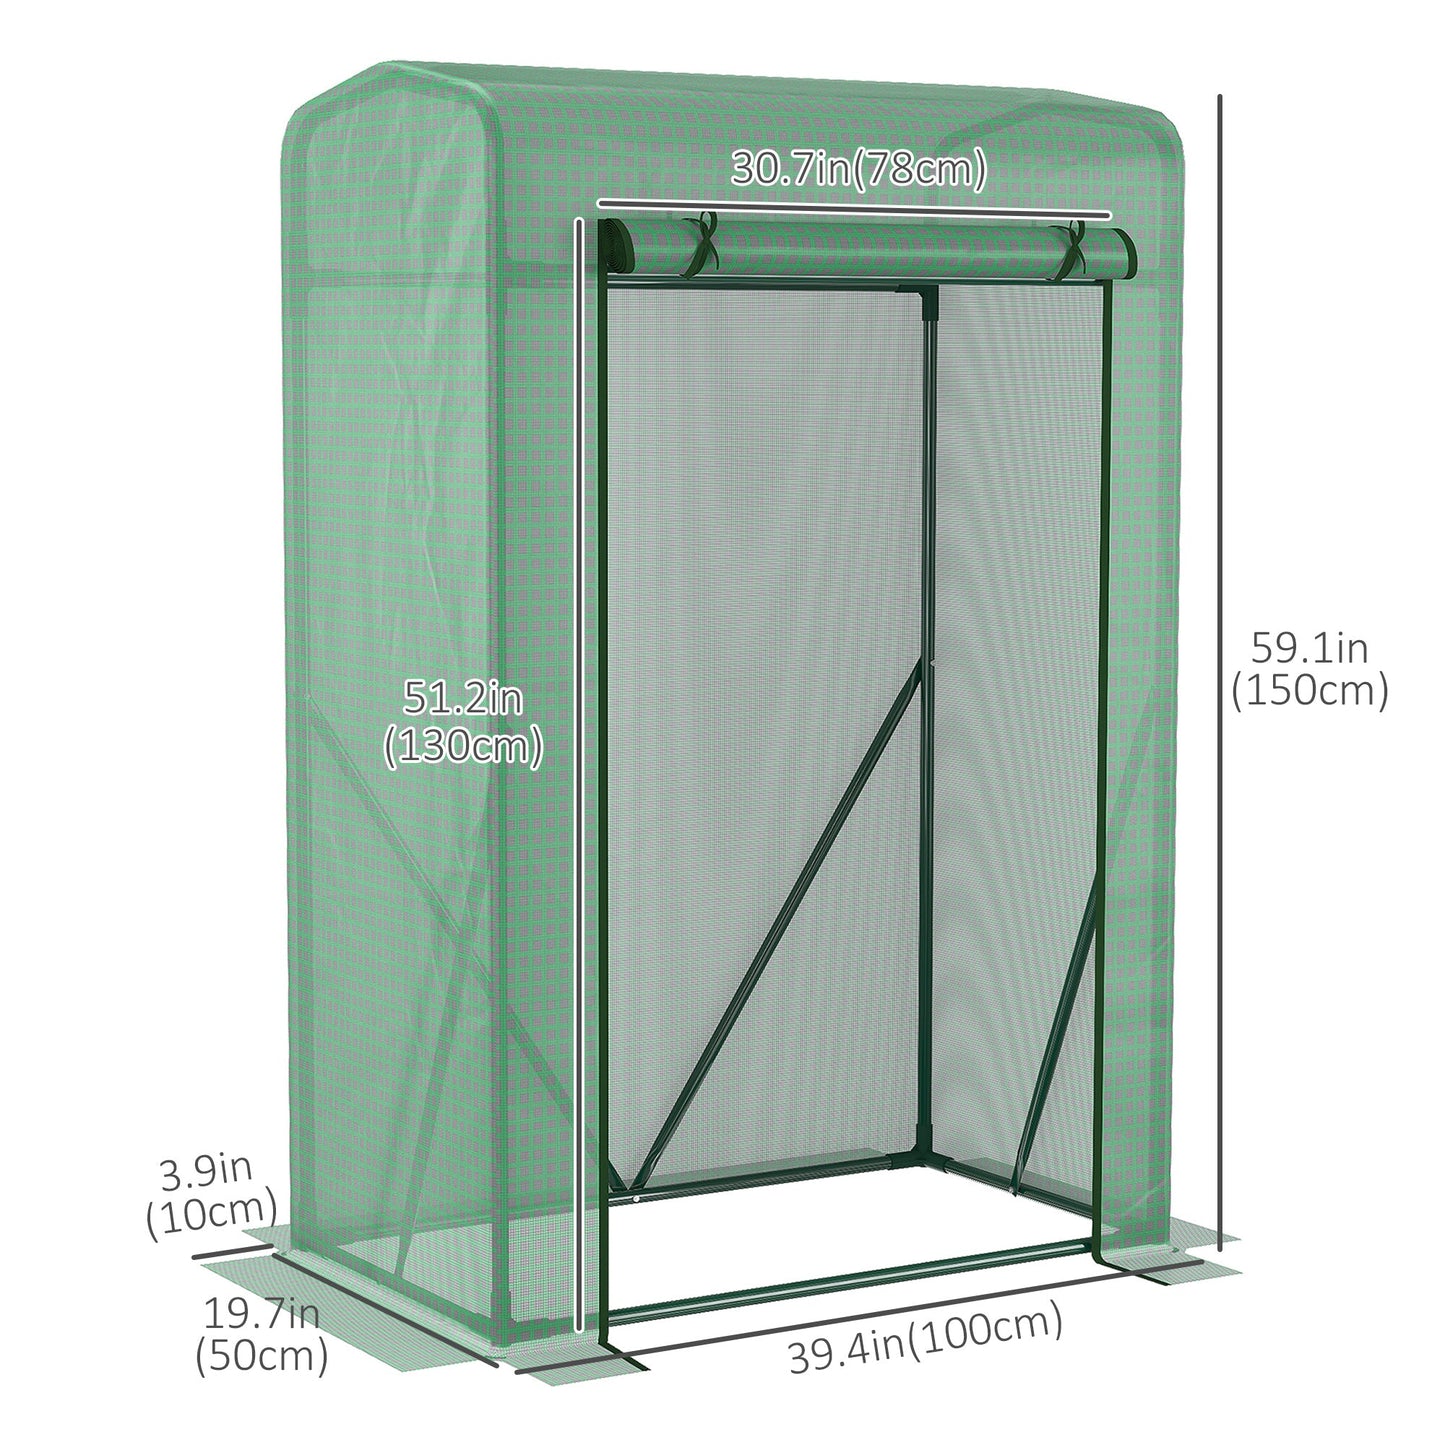 39" x 20" x 59" Outdoor Tomato Greenhouse with Zipper Roll-up Door, Mini Plant Growhouse Hot House with Steel Frame, PE Cover at Gallery Canada